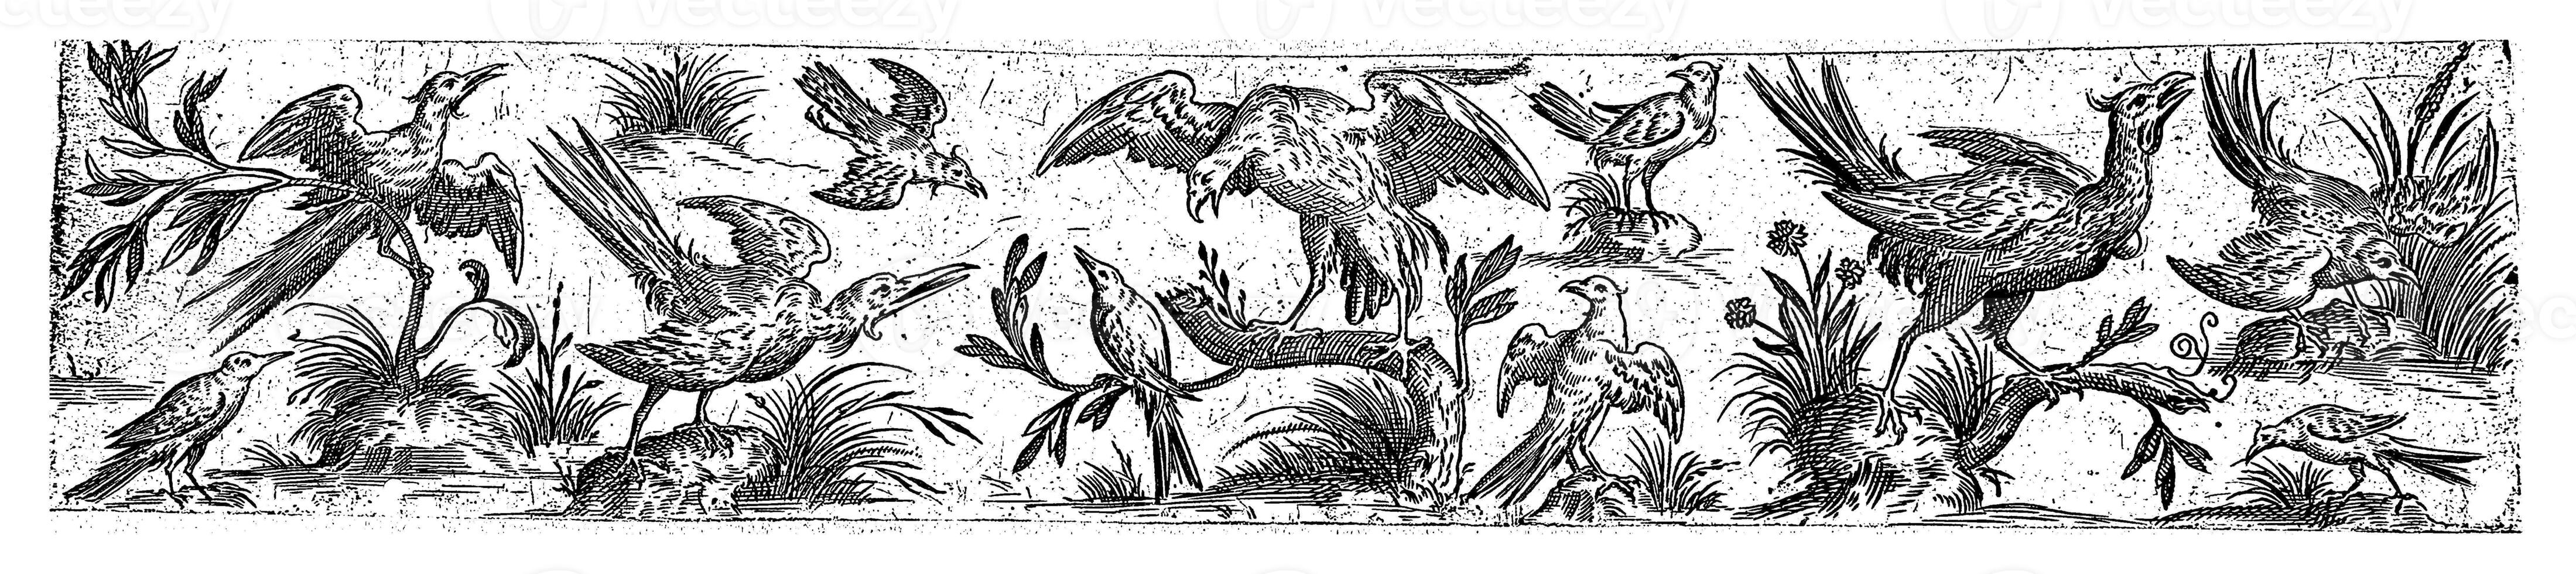 Frieze with eleven birds, in the middle is a large bird on a branch, Hans Liefrinck II possibly, after Hans Collaert I, 1631 photo